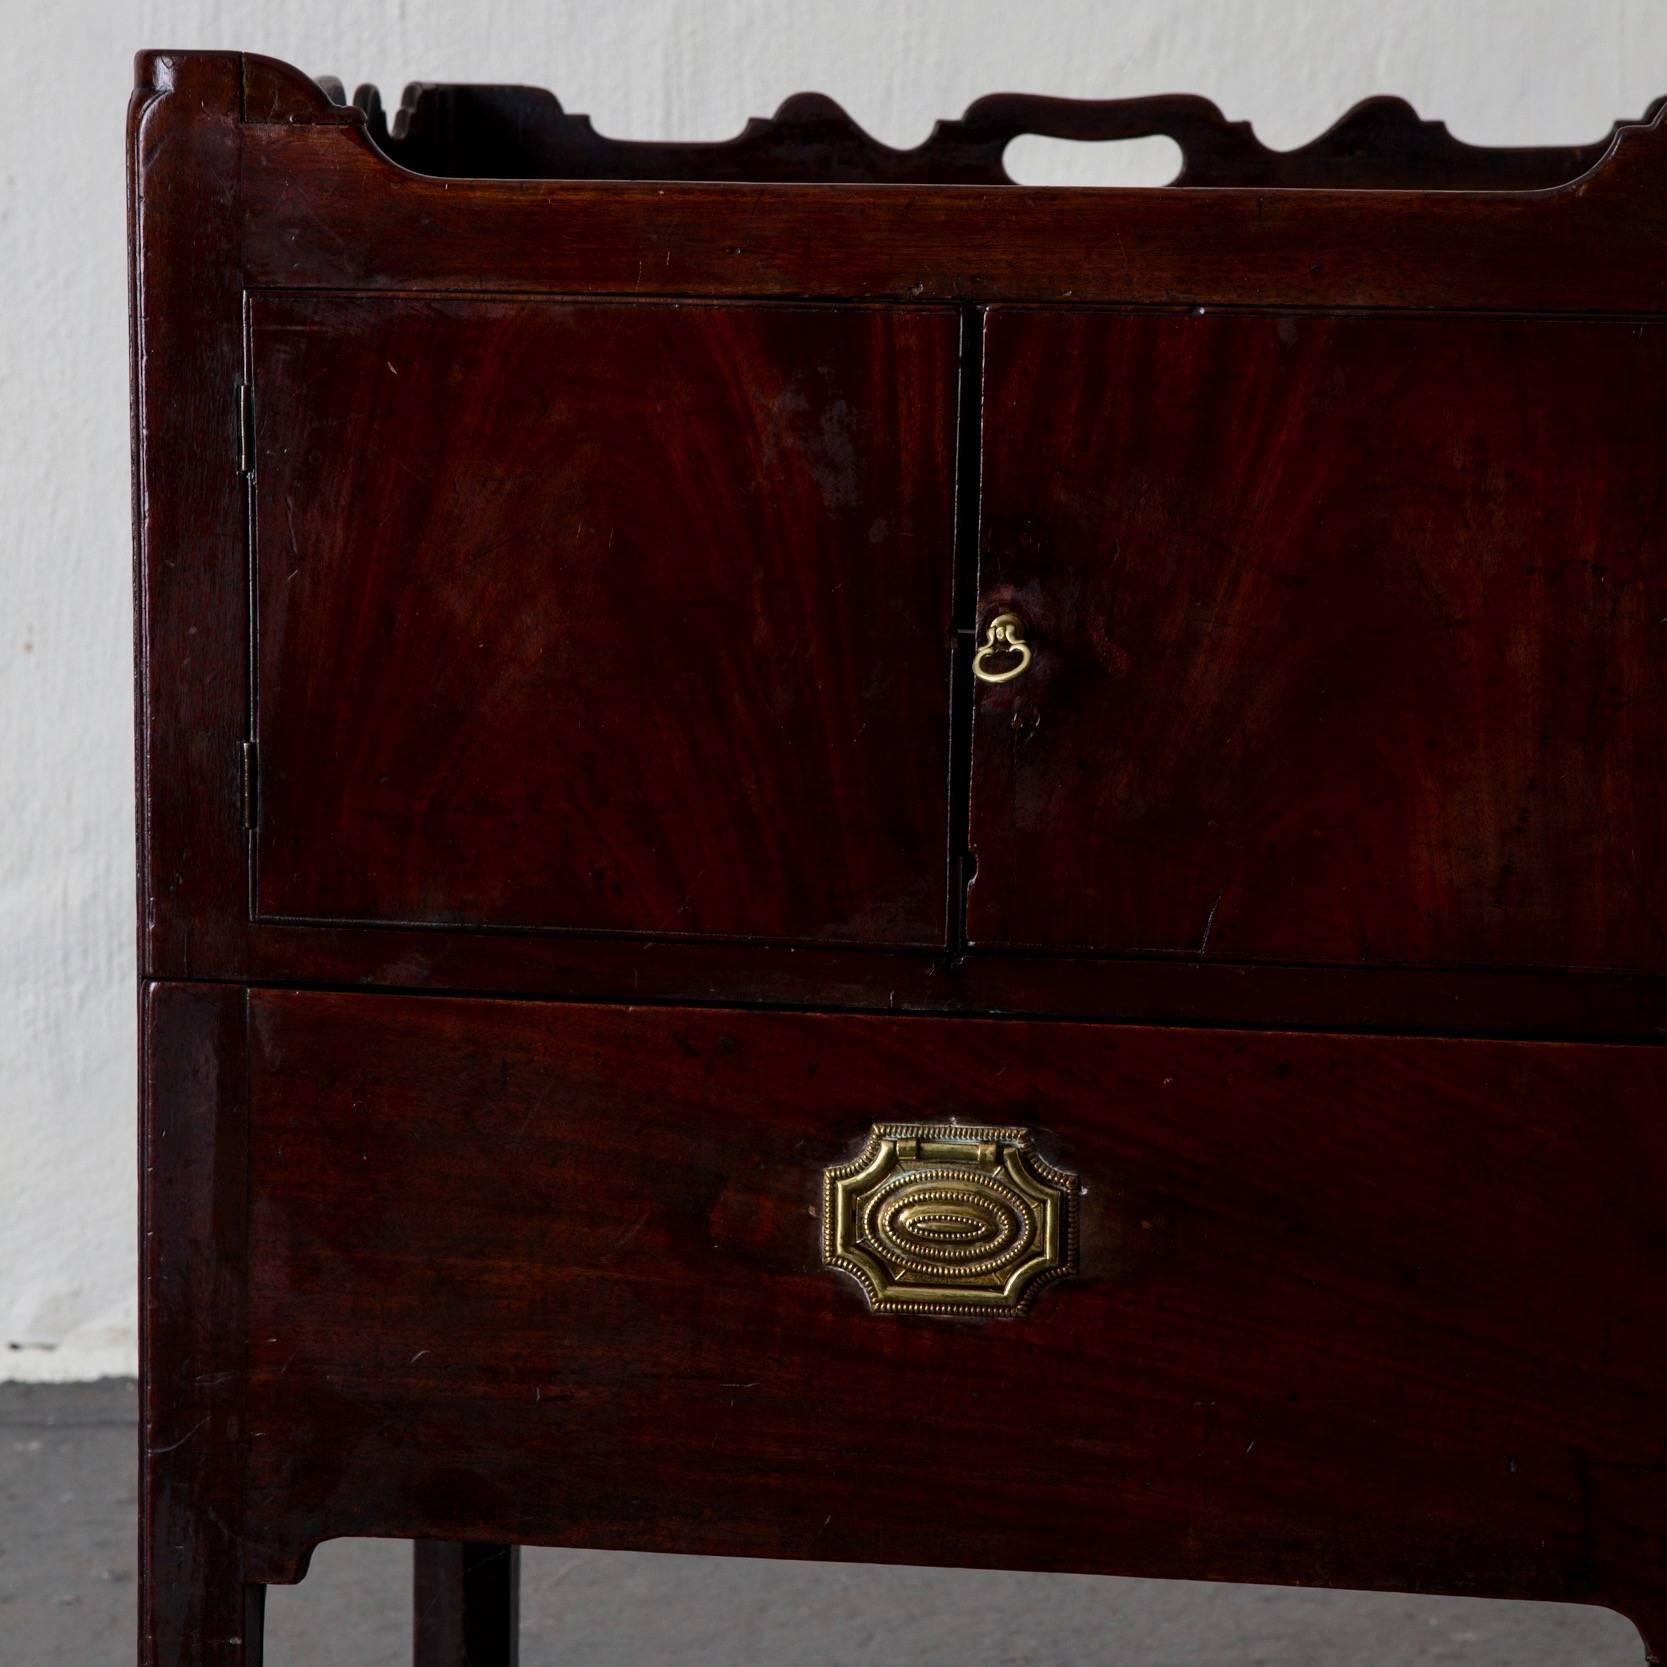 A side table or nightstand made in mahogany with brass hardware. One shelf and a drawer for storage. England 1700s during the Georgian period.